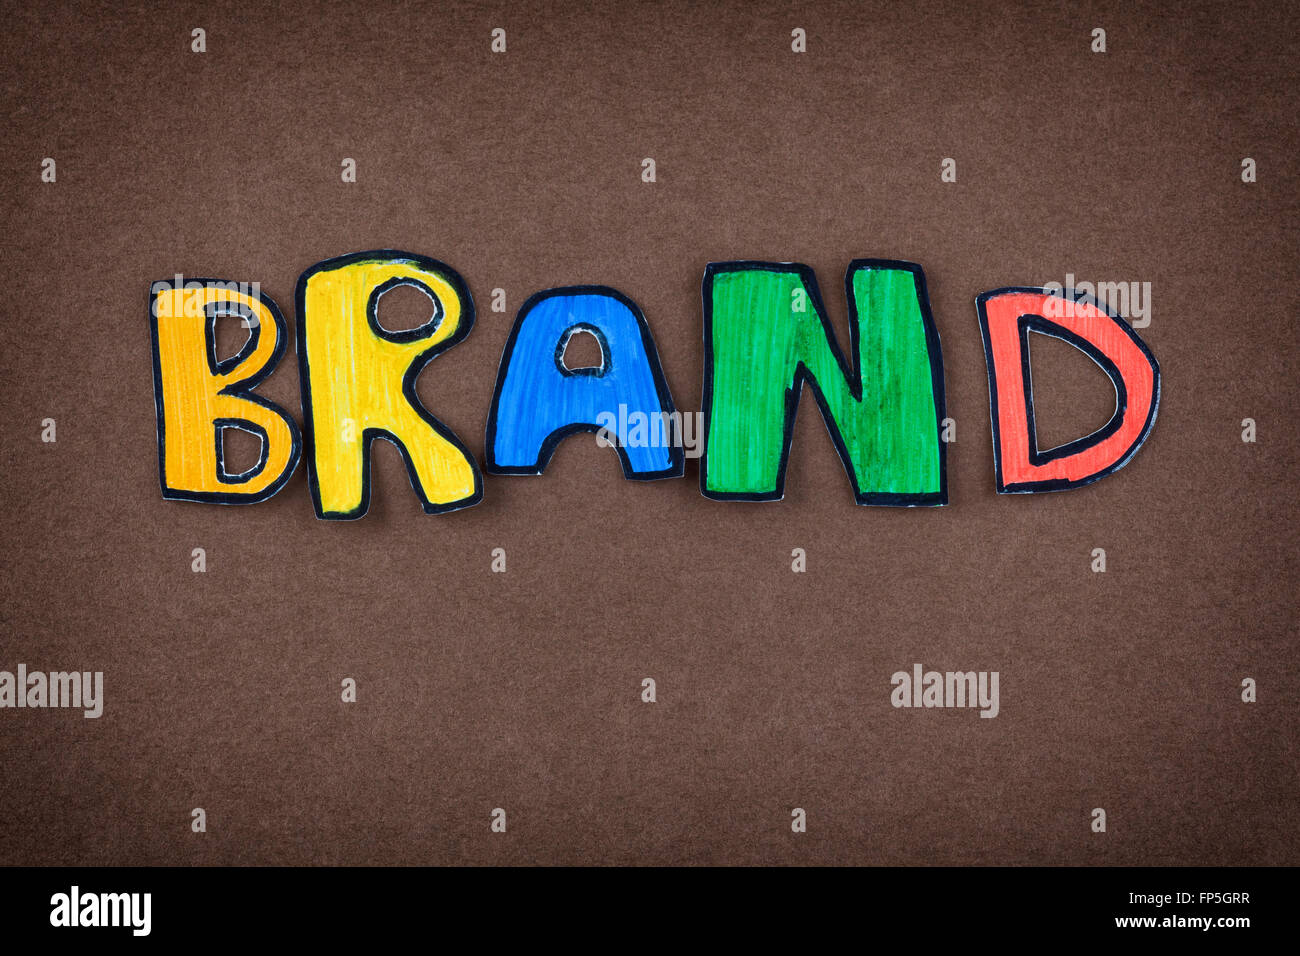 Colorful paper cut out word Brand on a brown background. Stock Photo